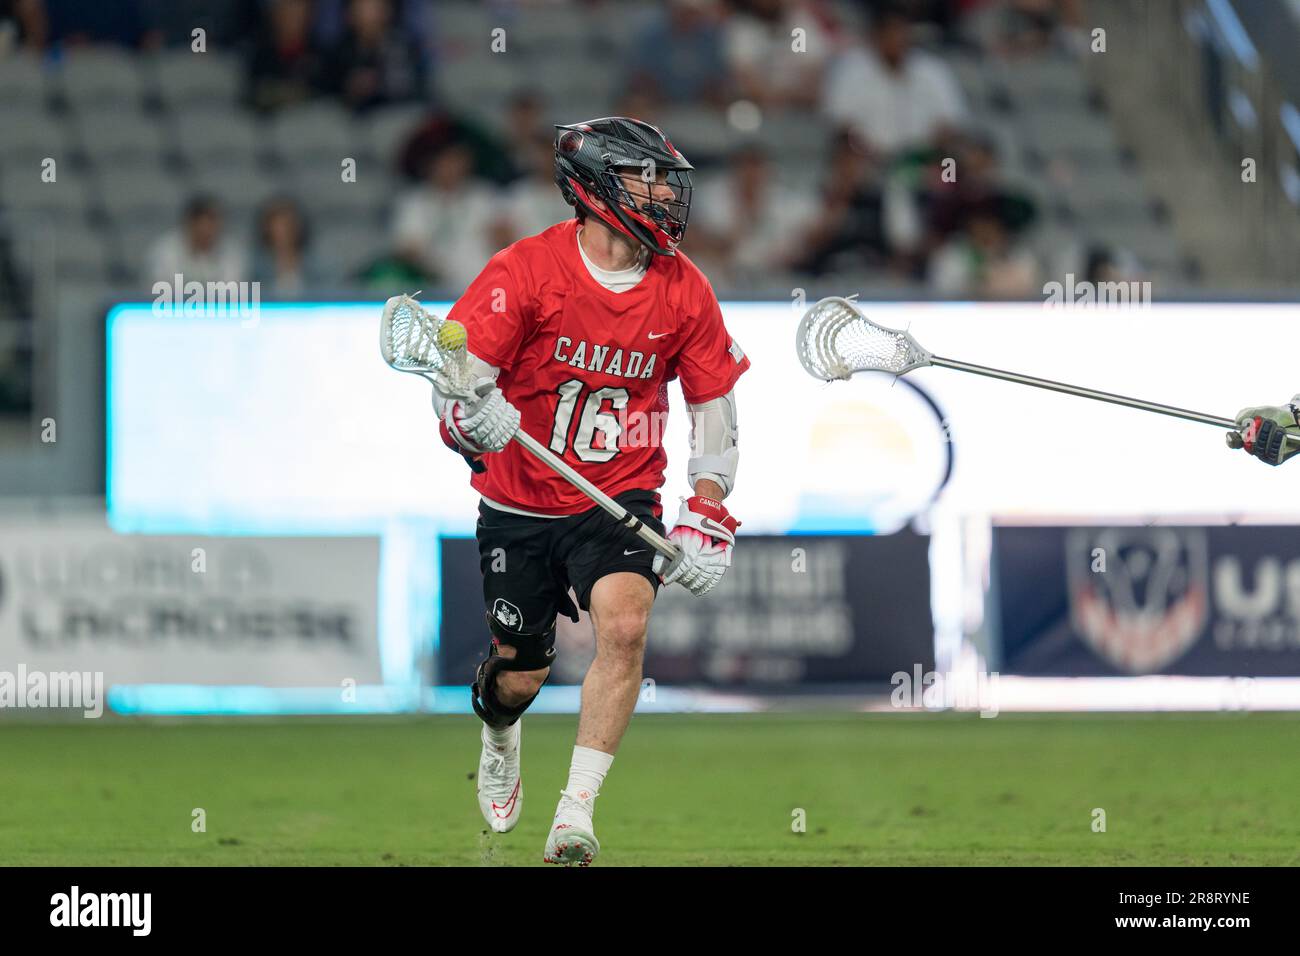 San Diego, USA. 21st June, 2023. Ryan Lee (16) controls the ball at the World Lacrosse Men's Championship opening game USA vs Canada at Snapdragon Stadium. Credit: Ben Nichols/Alamy Live News Stock Photo